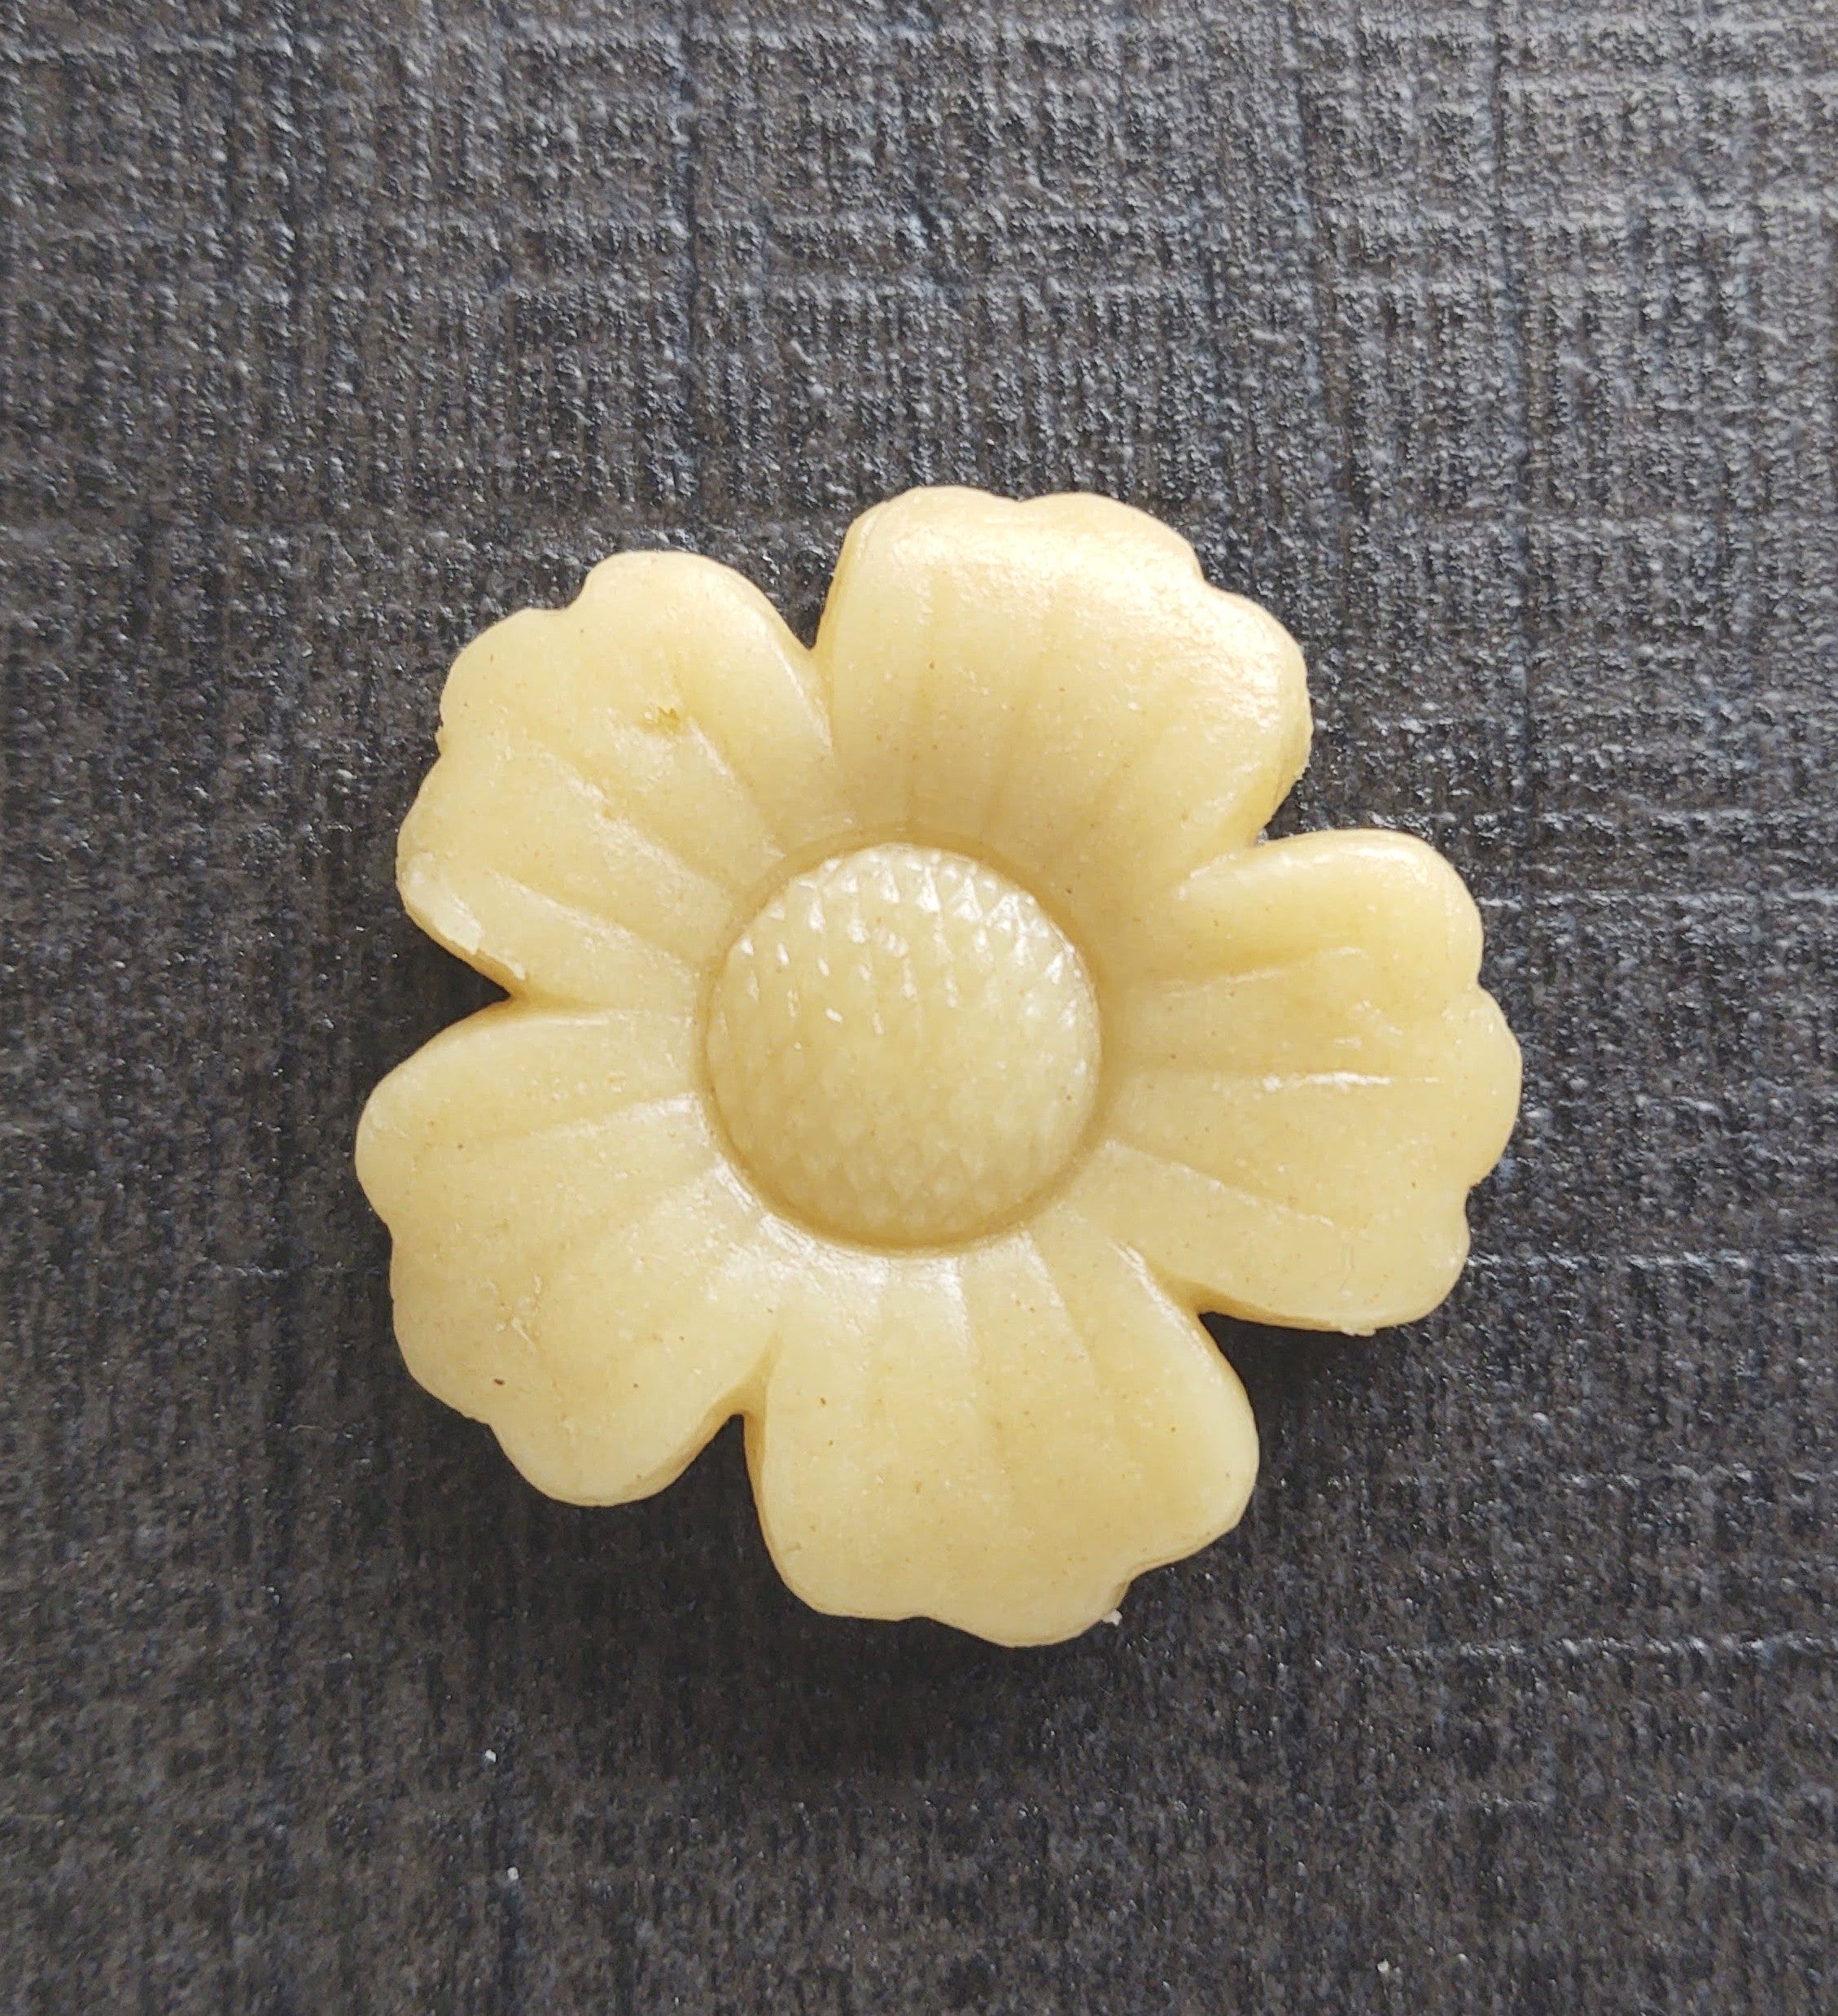 Mini Flower Silicone Cookie Mold